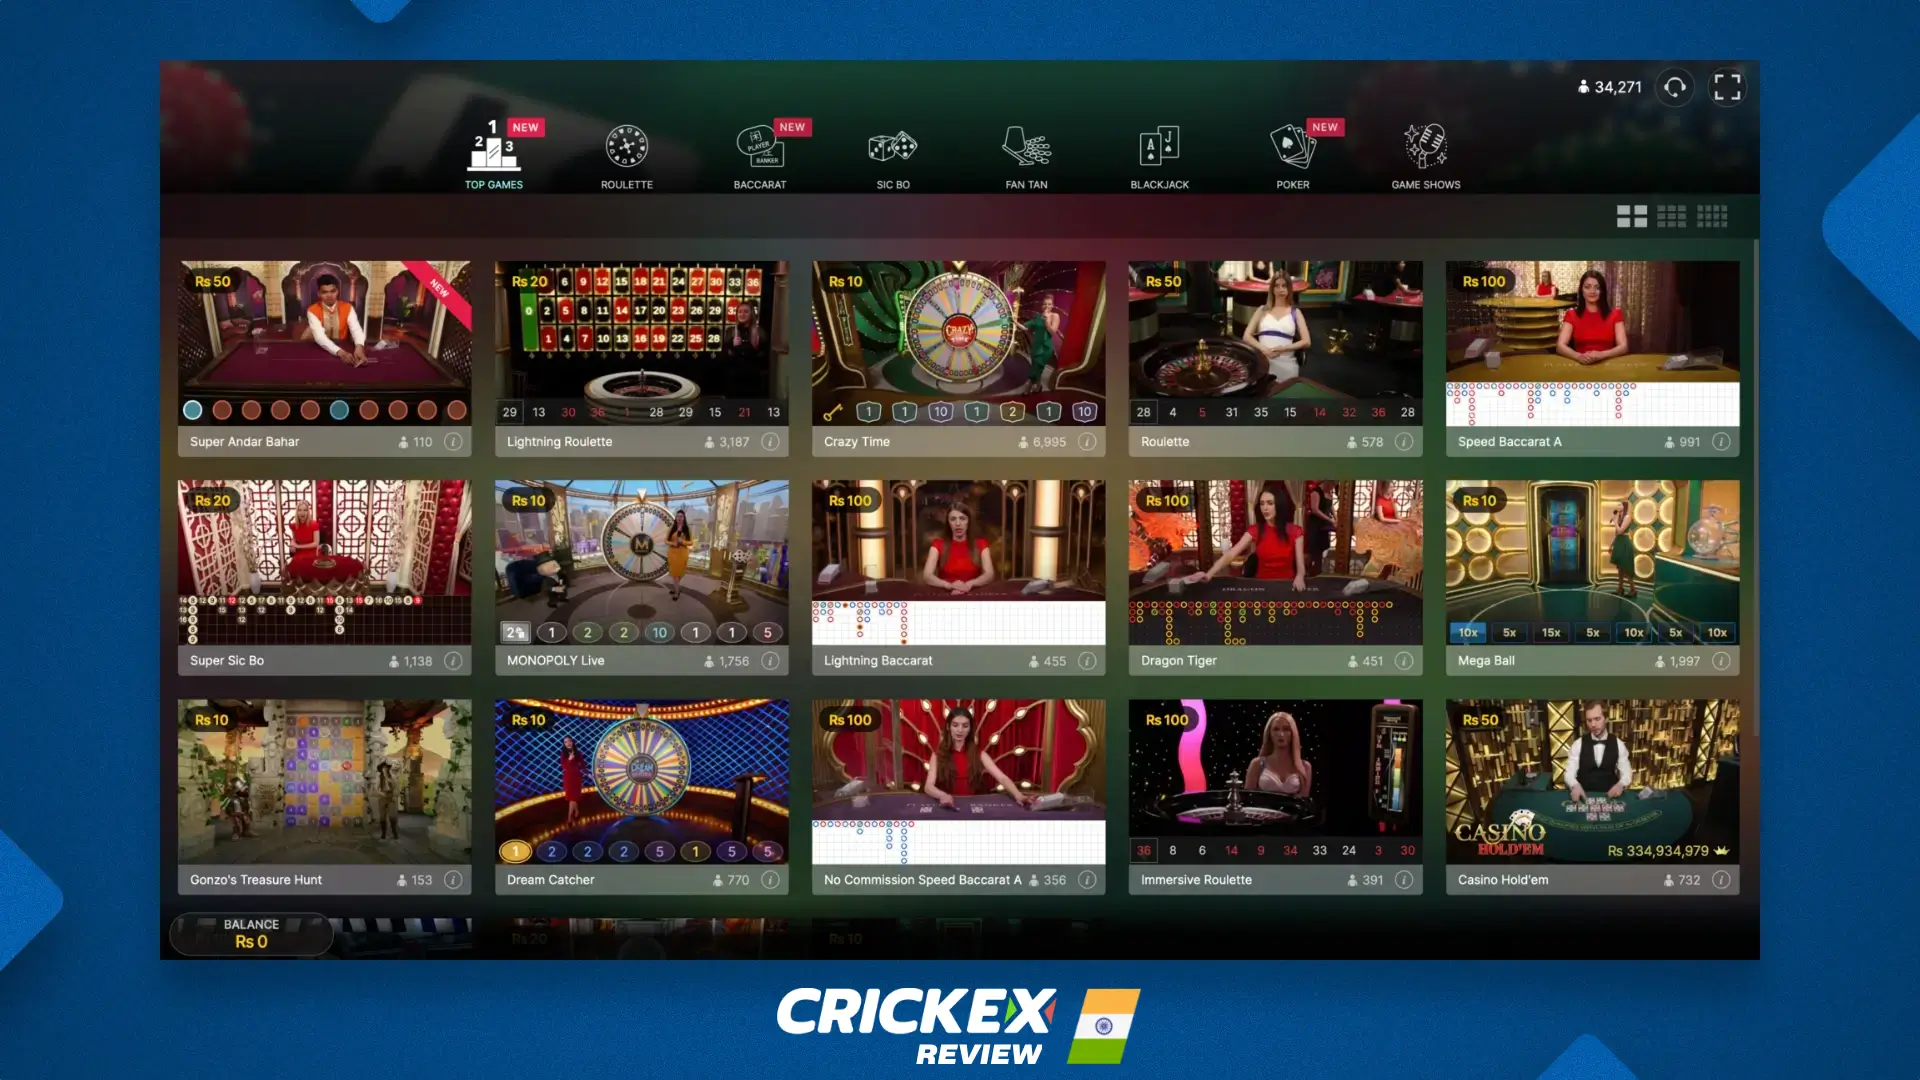 Crickex casino offers a lot of entertainment, including roulette, blackjack, baccarat and others